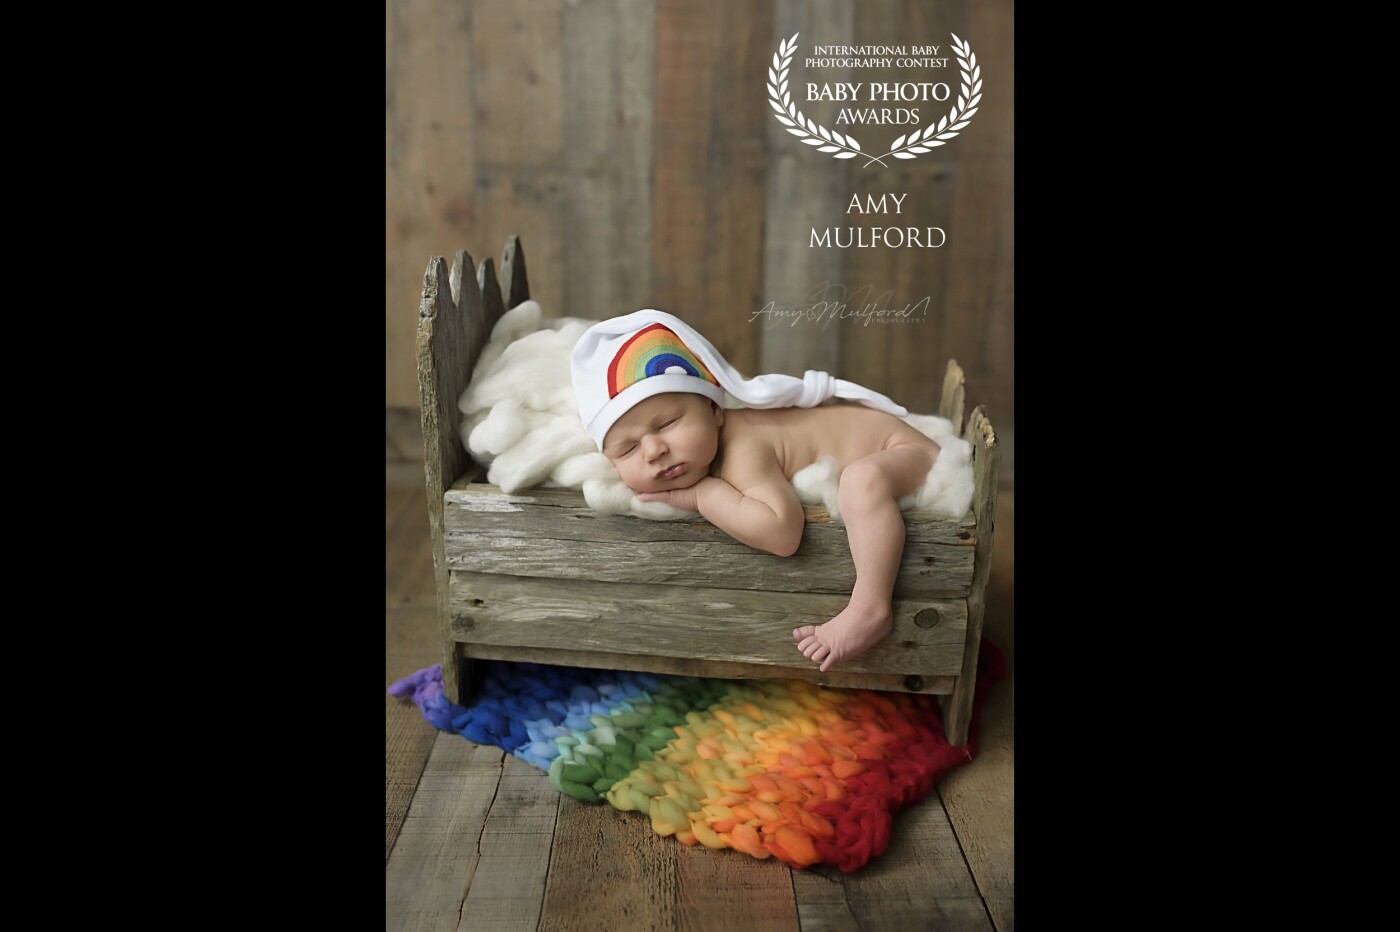 This little guy was a recipient of one of my monthly ‘rainbow baby’ newborn session giveaways. I offer these free sessions to deserving families once a month. Baby B was born a couple of years after his brother passed away in utero at 33 weeks gestation. Baby B is a true blessing to his family.  